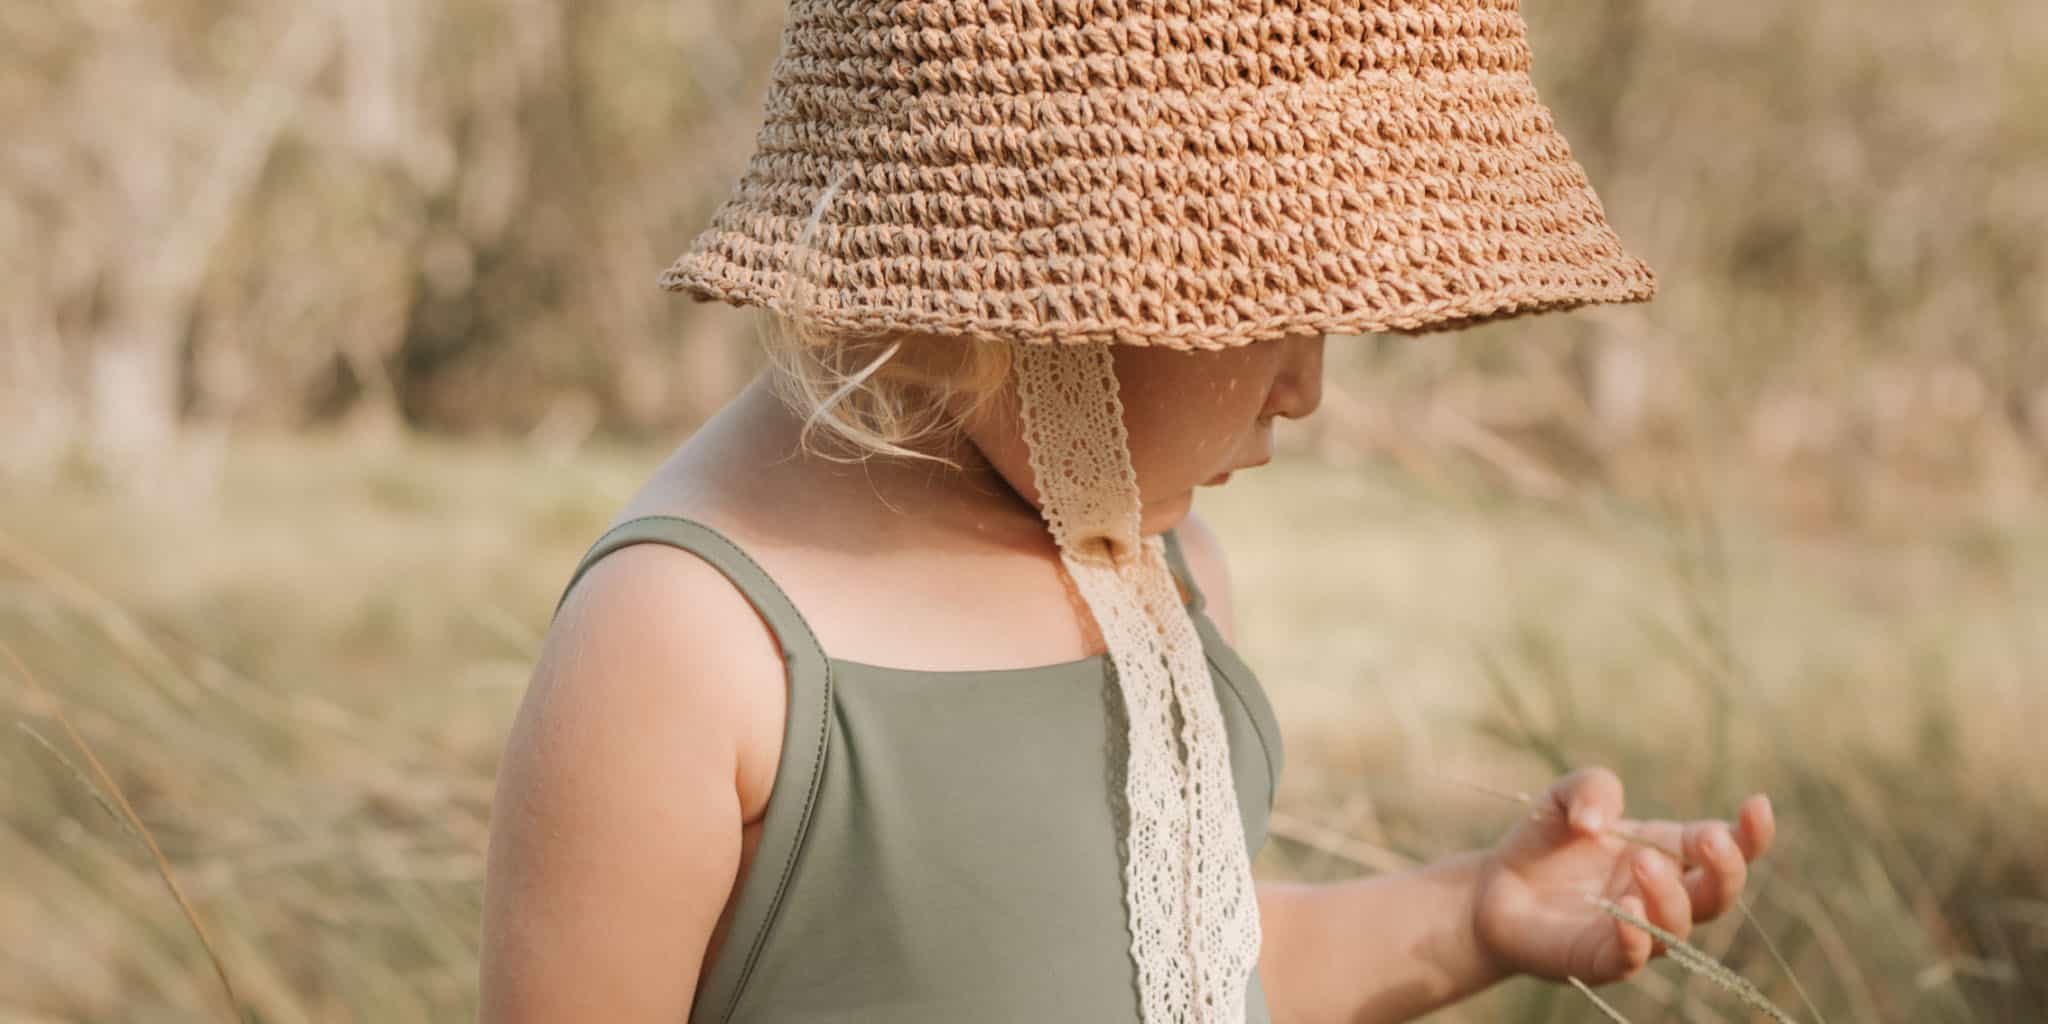 A child wearing sustainable swimwear and a hat.